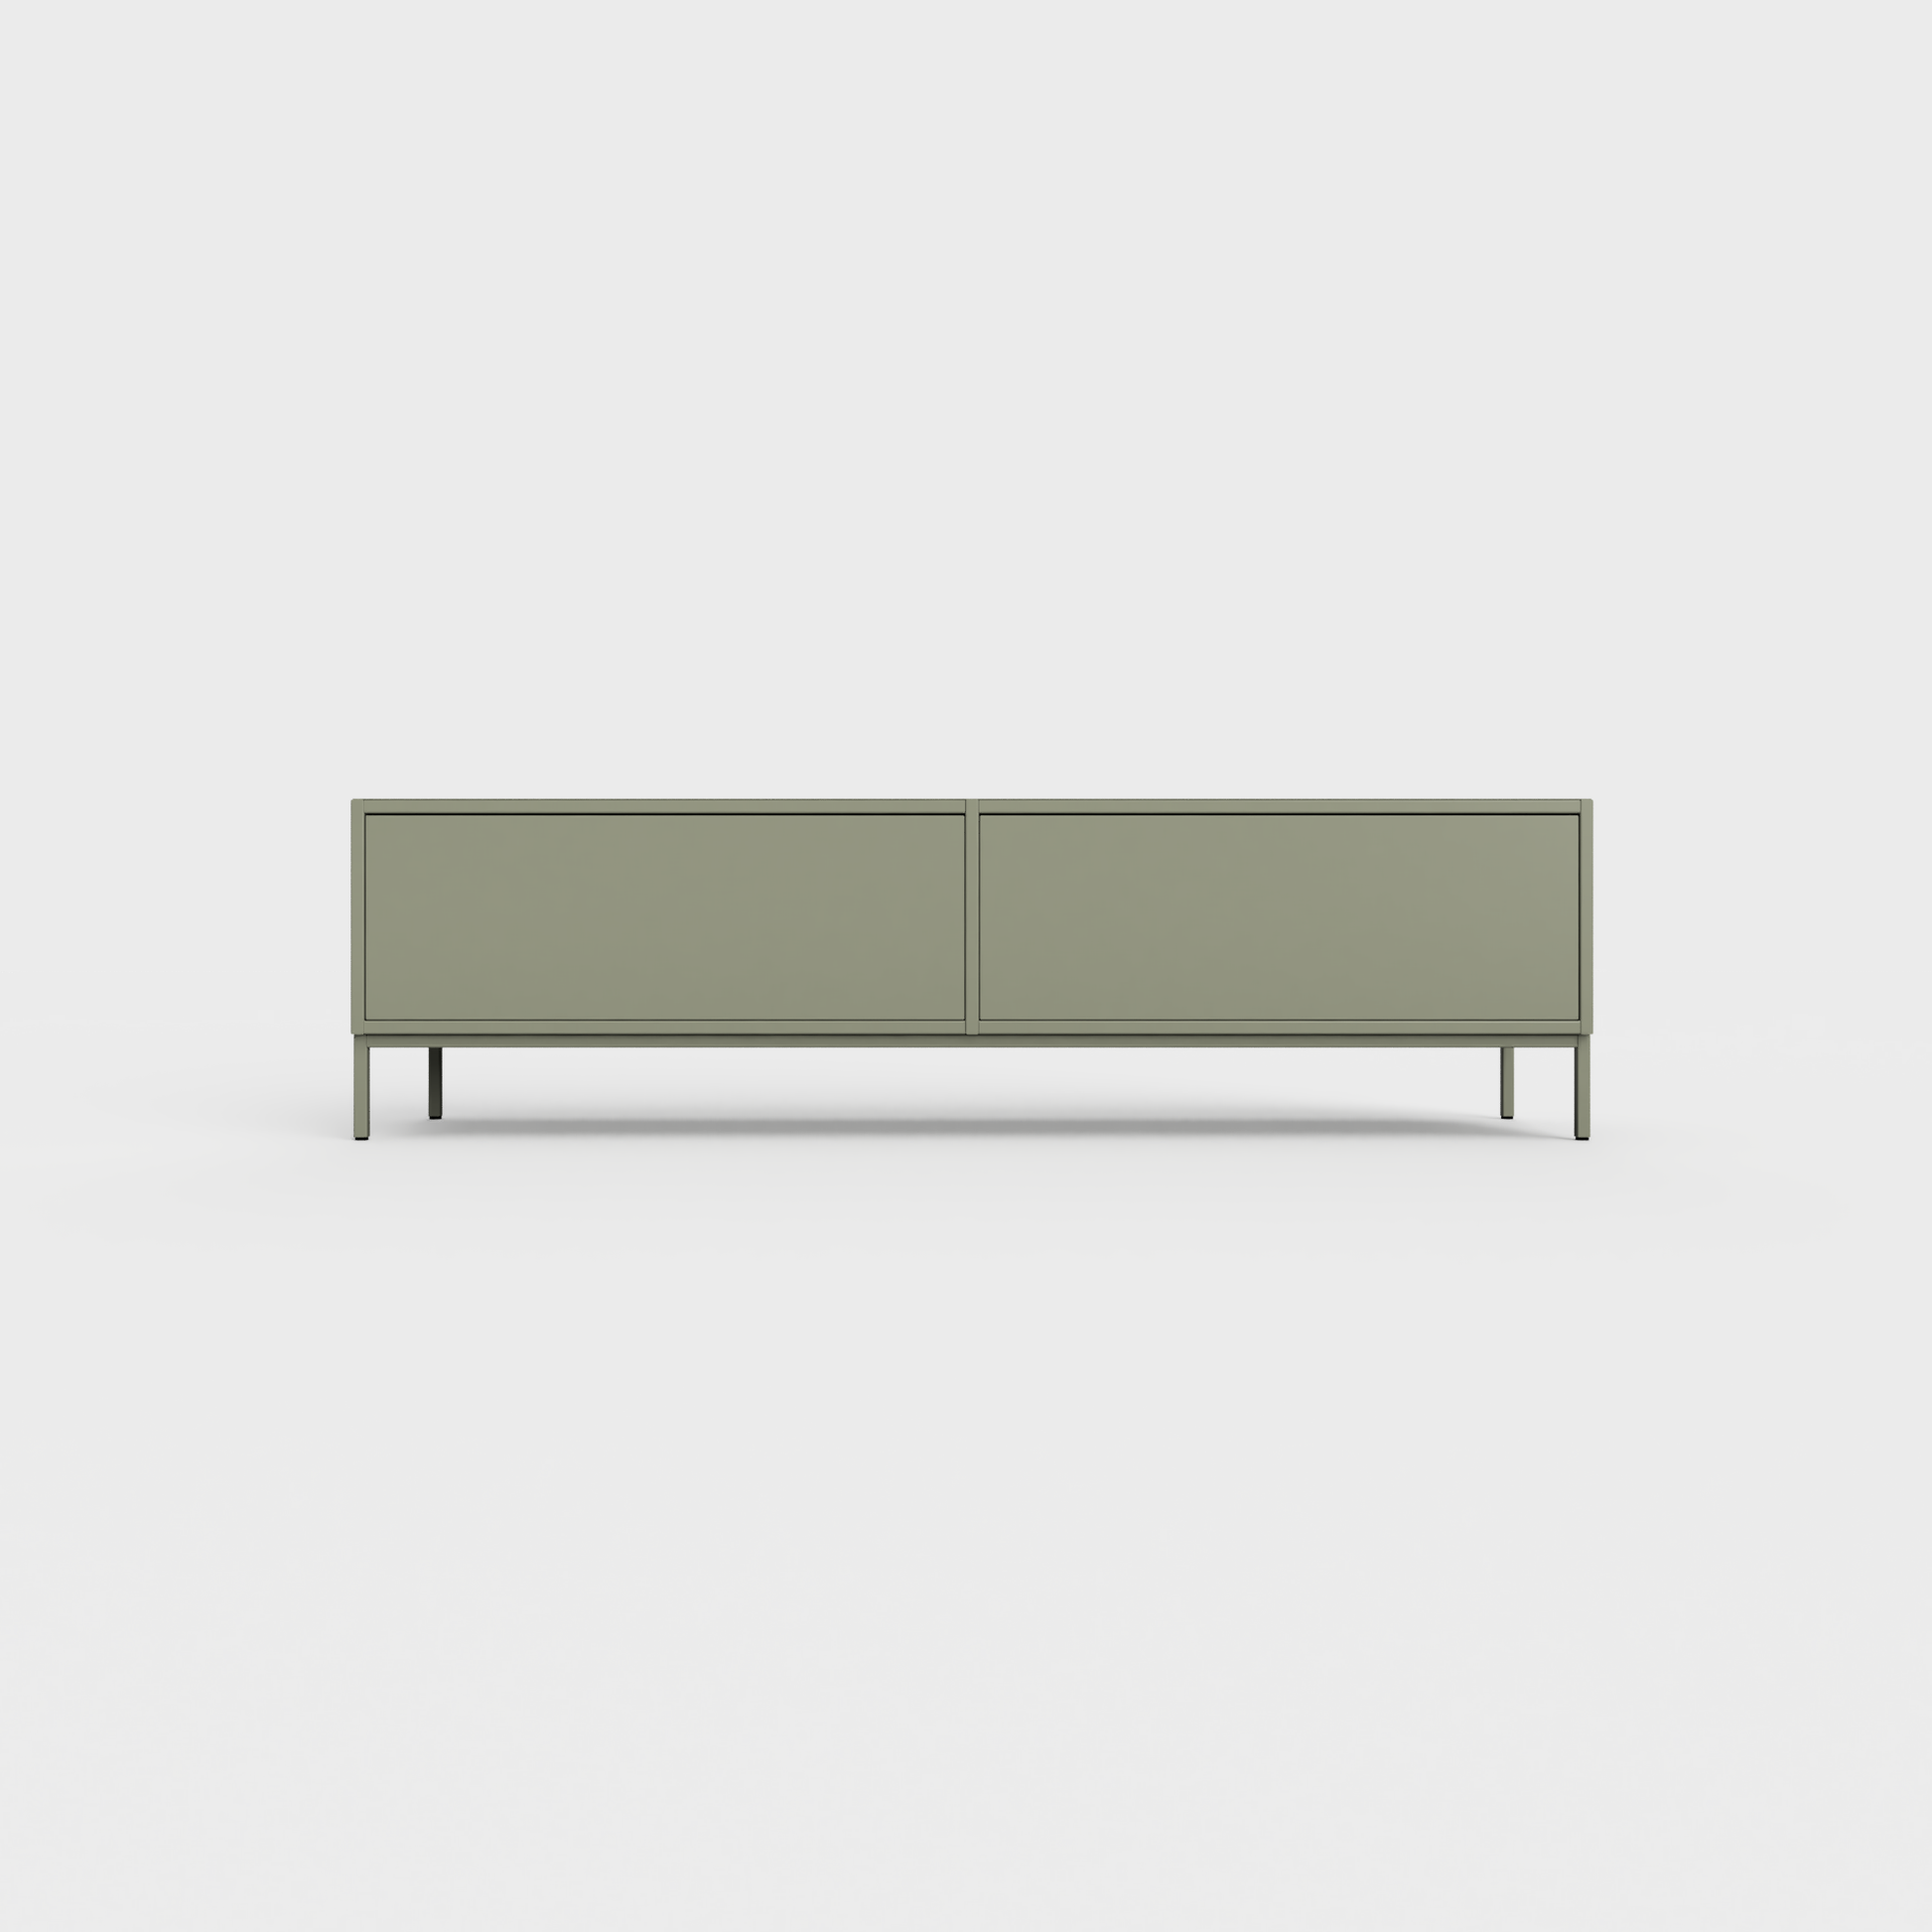 Prunus 01 Lowboard in Faded Olive color, powder-coated steel, elegant and modern piece of furniture for your living room